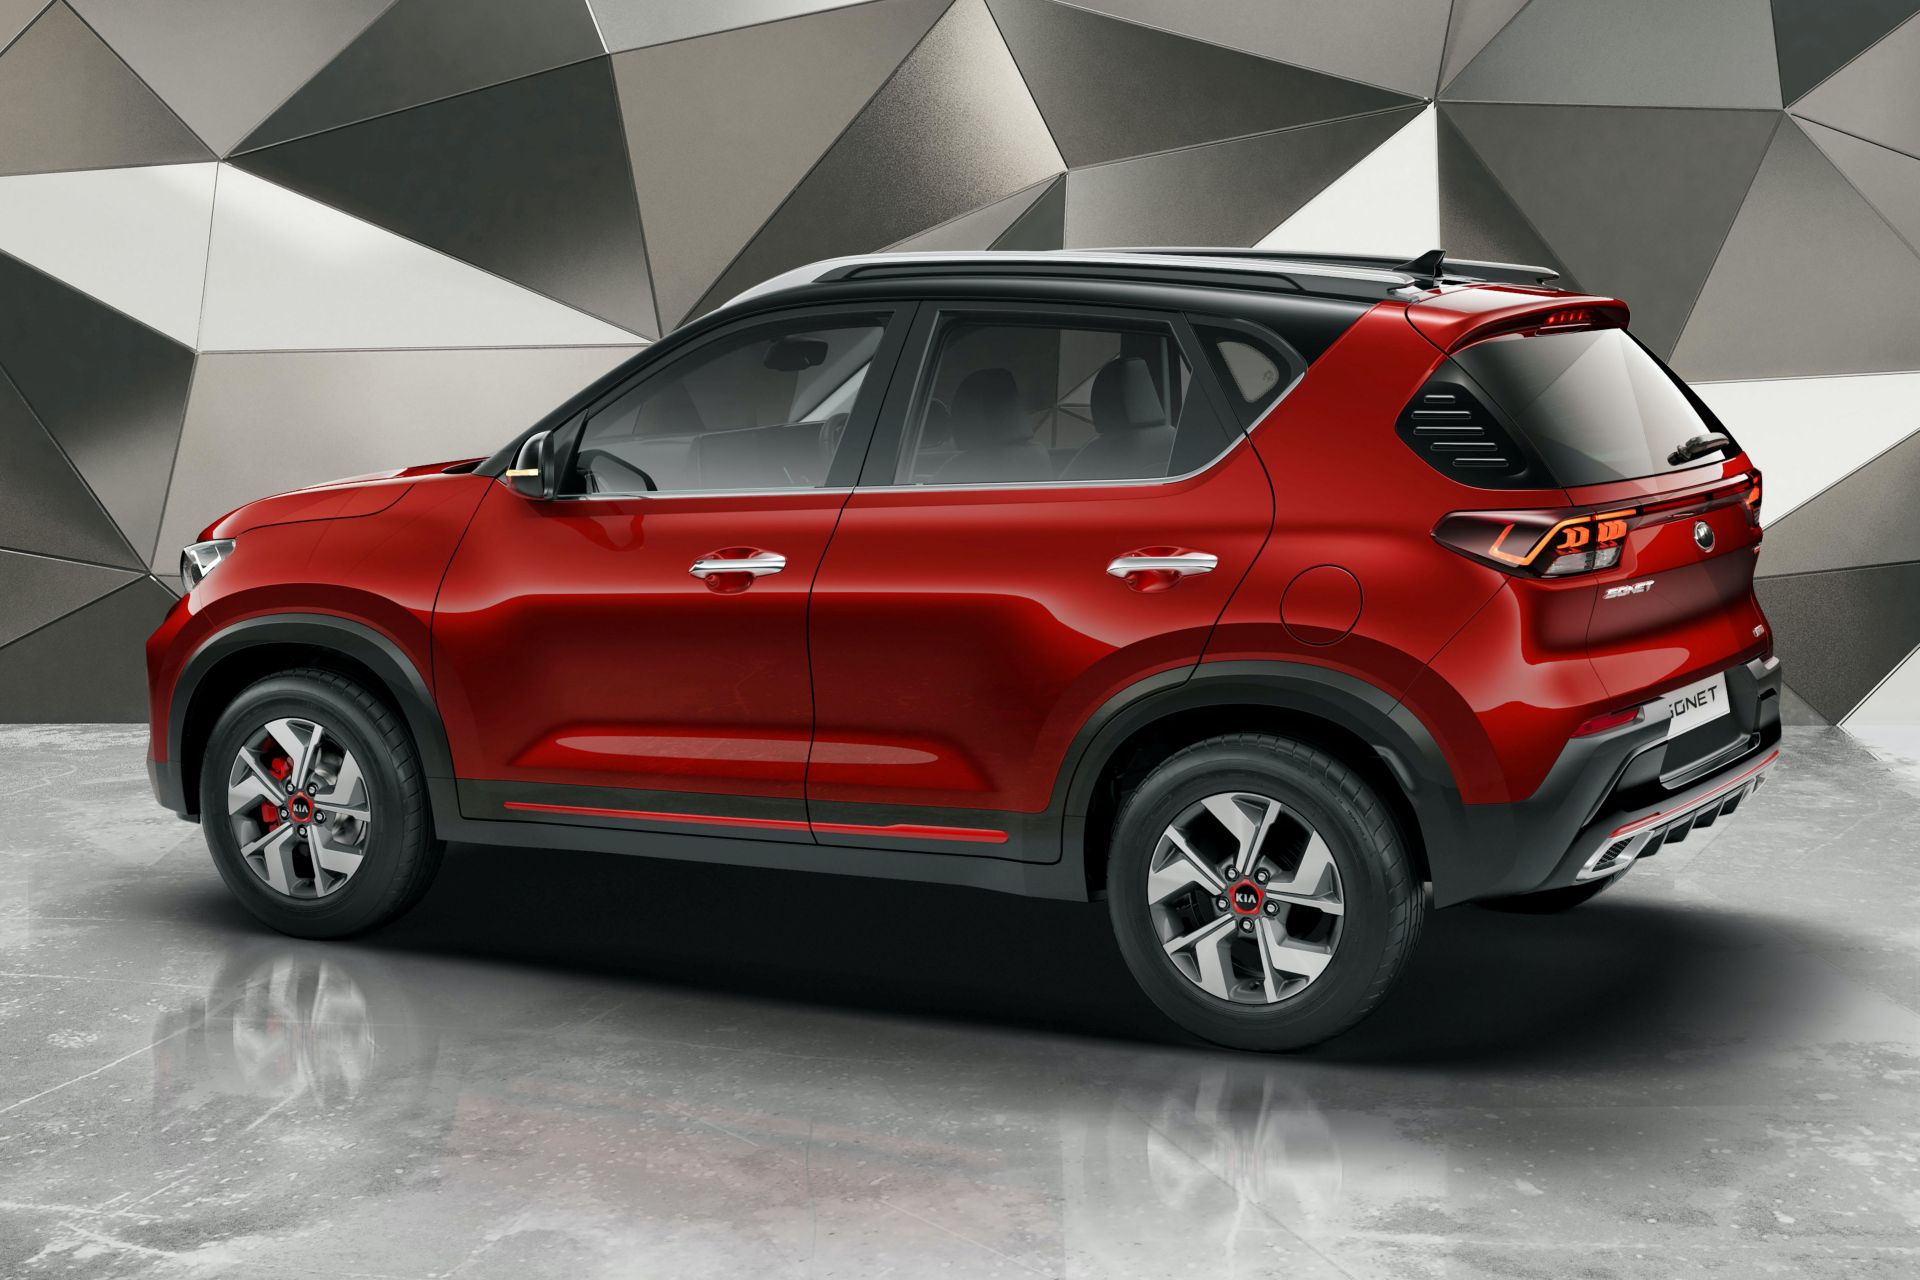 2021 Kia Sonet Encapsulates The Brand's SUV Know-How In A Tiny Package ...